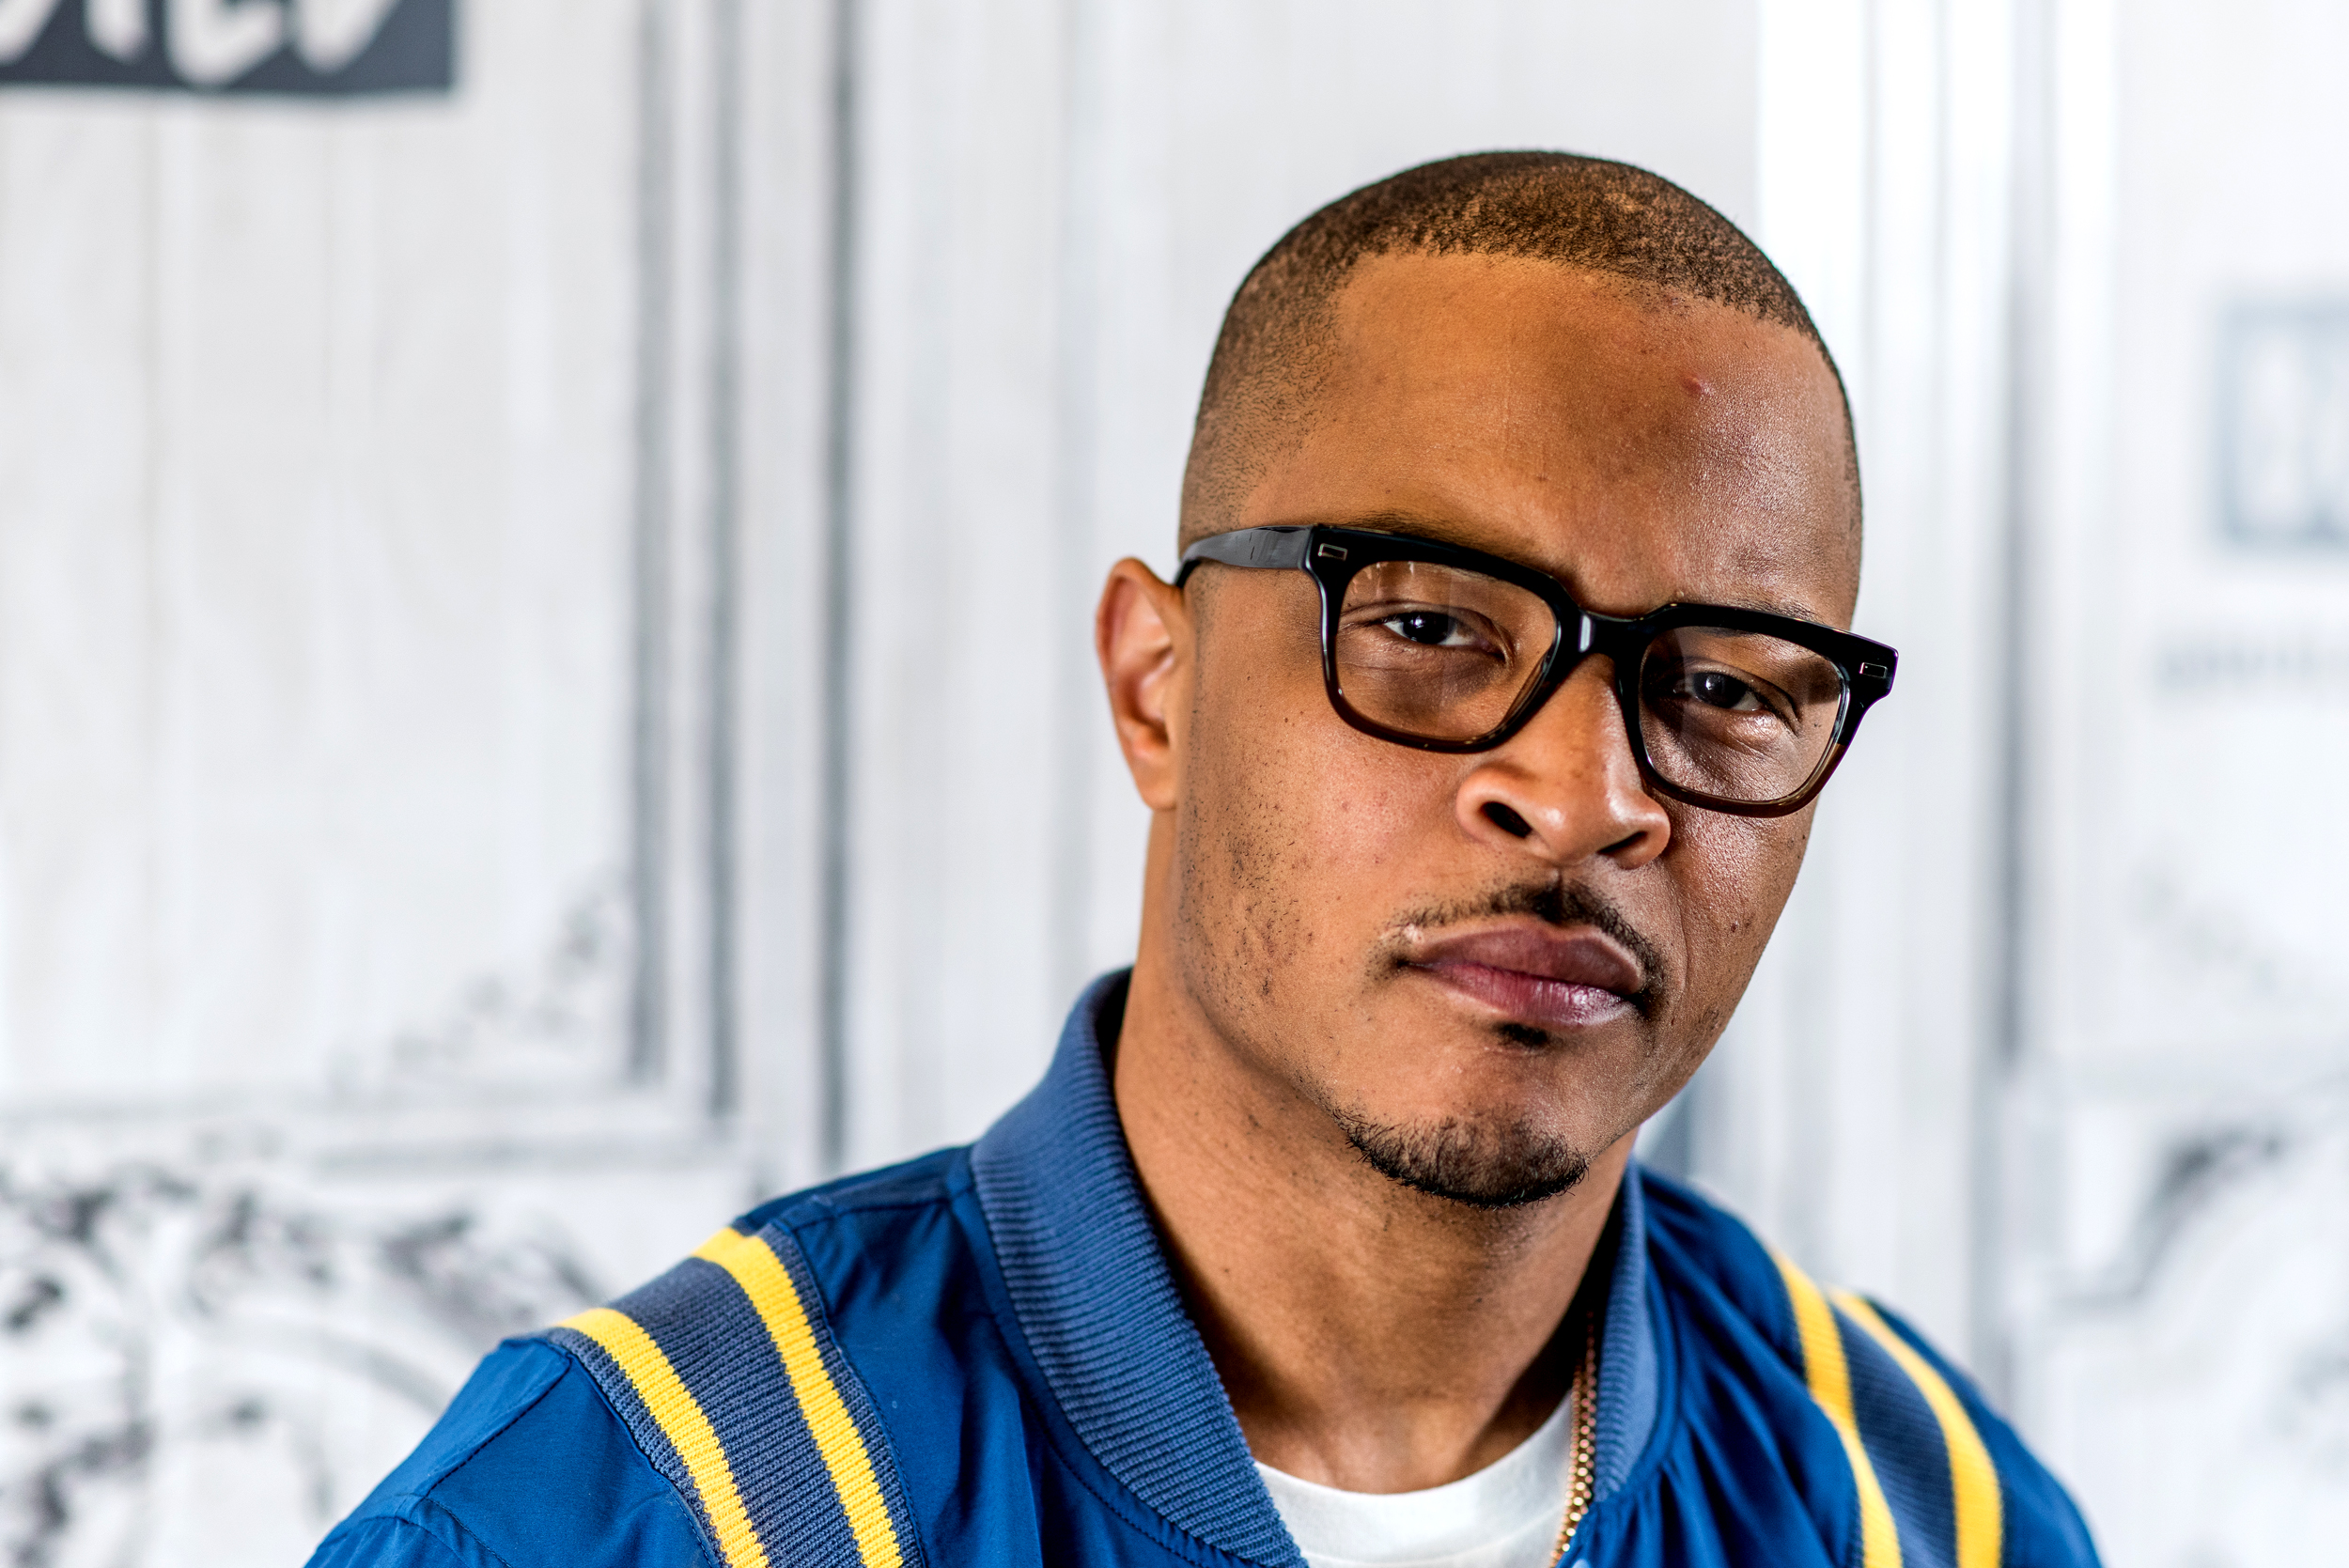 T.I. apologizes and says he was joking about ‘hymen’ comment